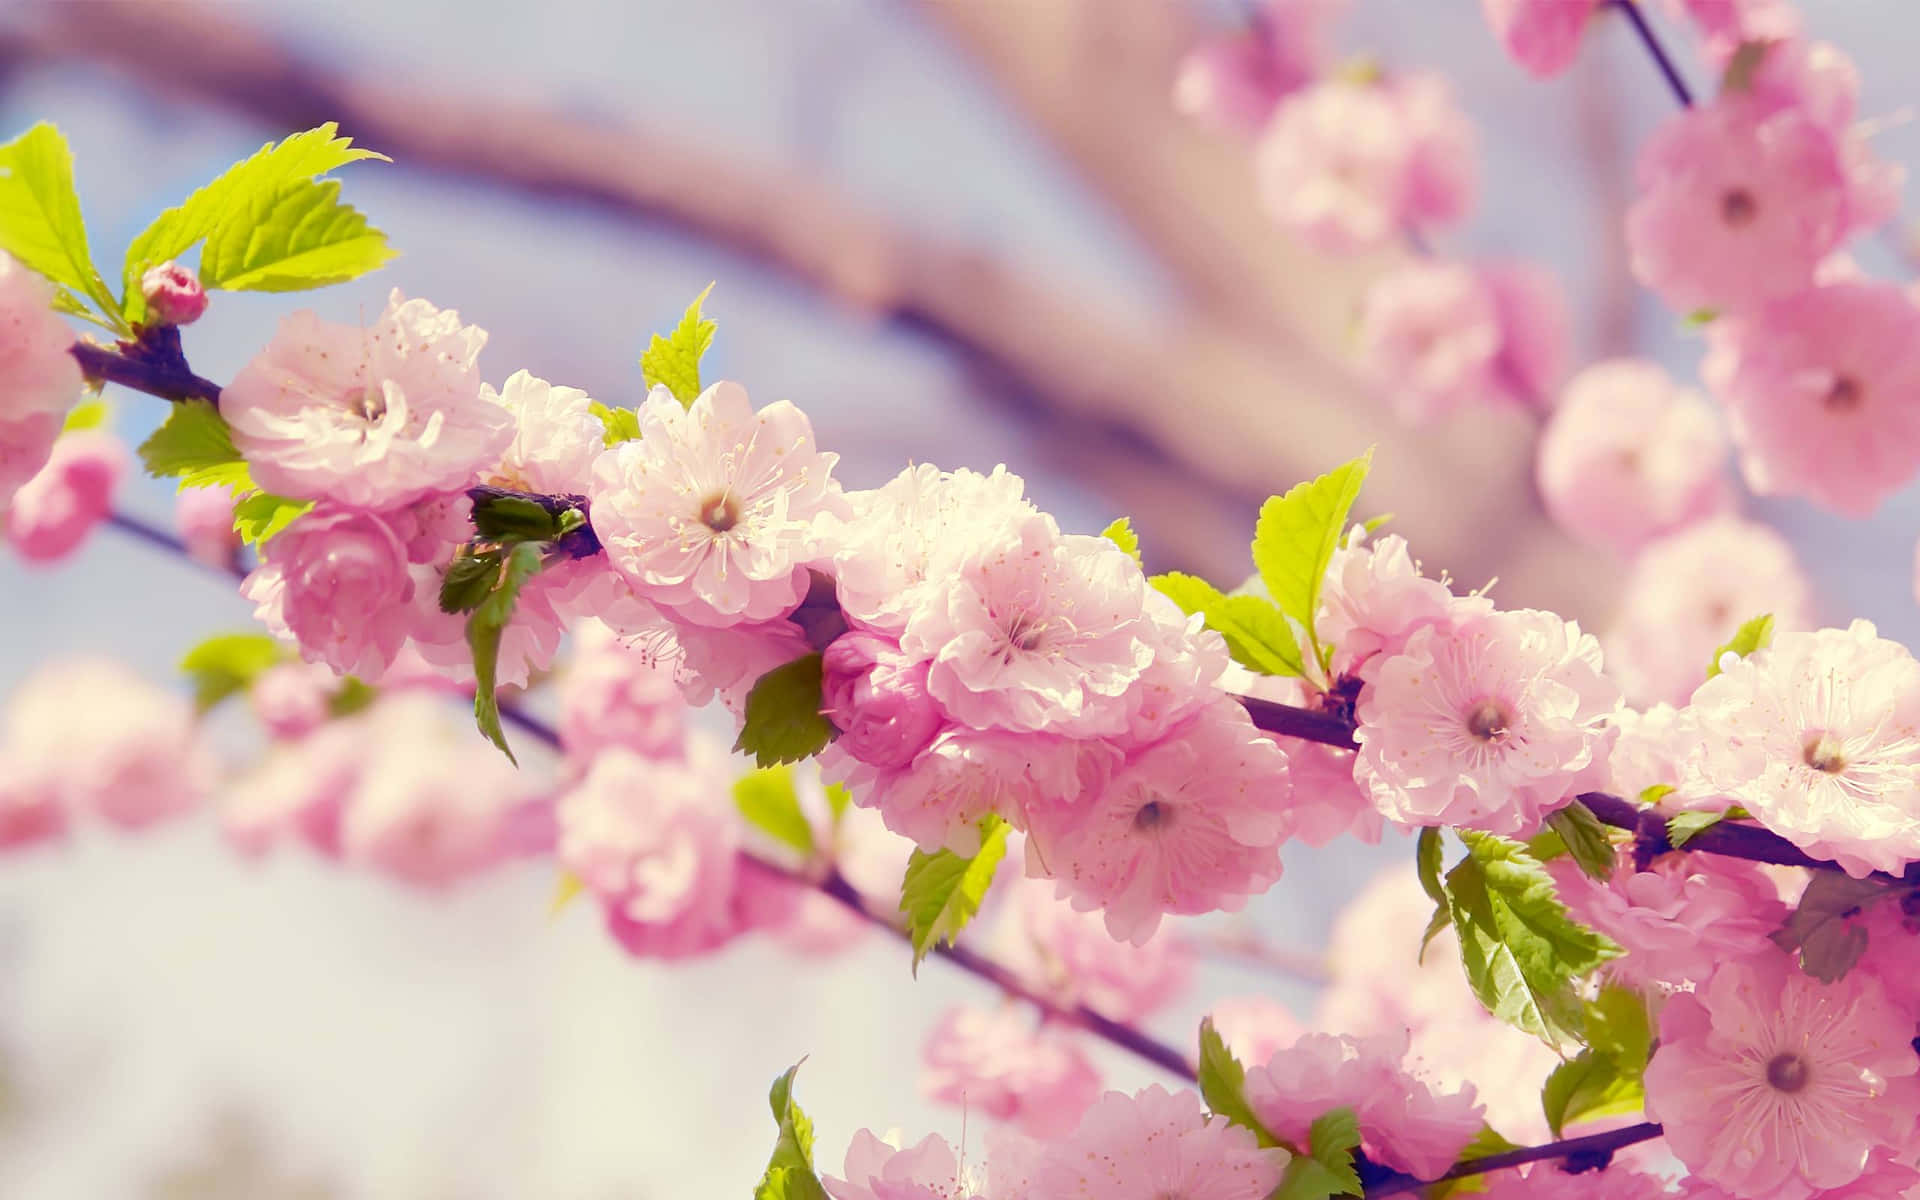 Pink Flowers On A Branch With Green Leaves Wallpaper